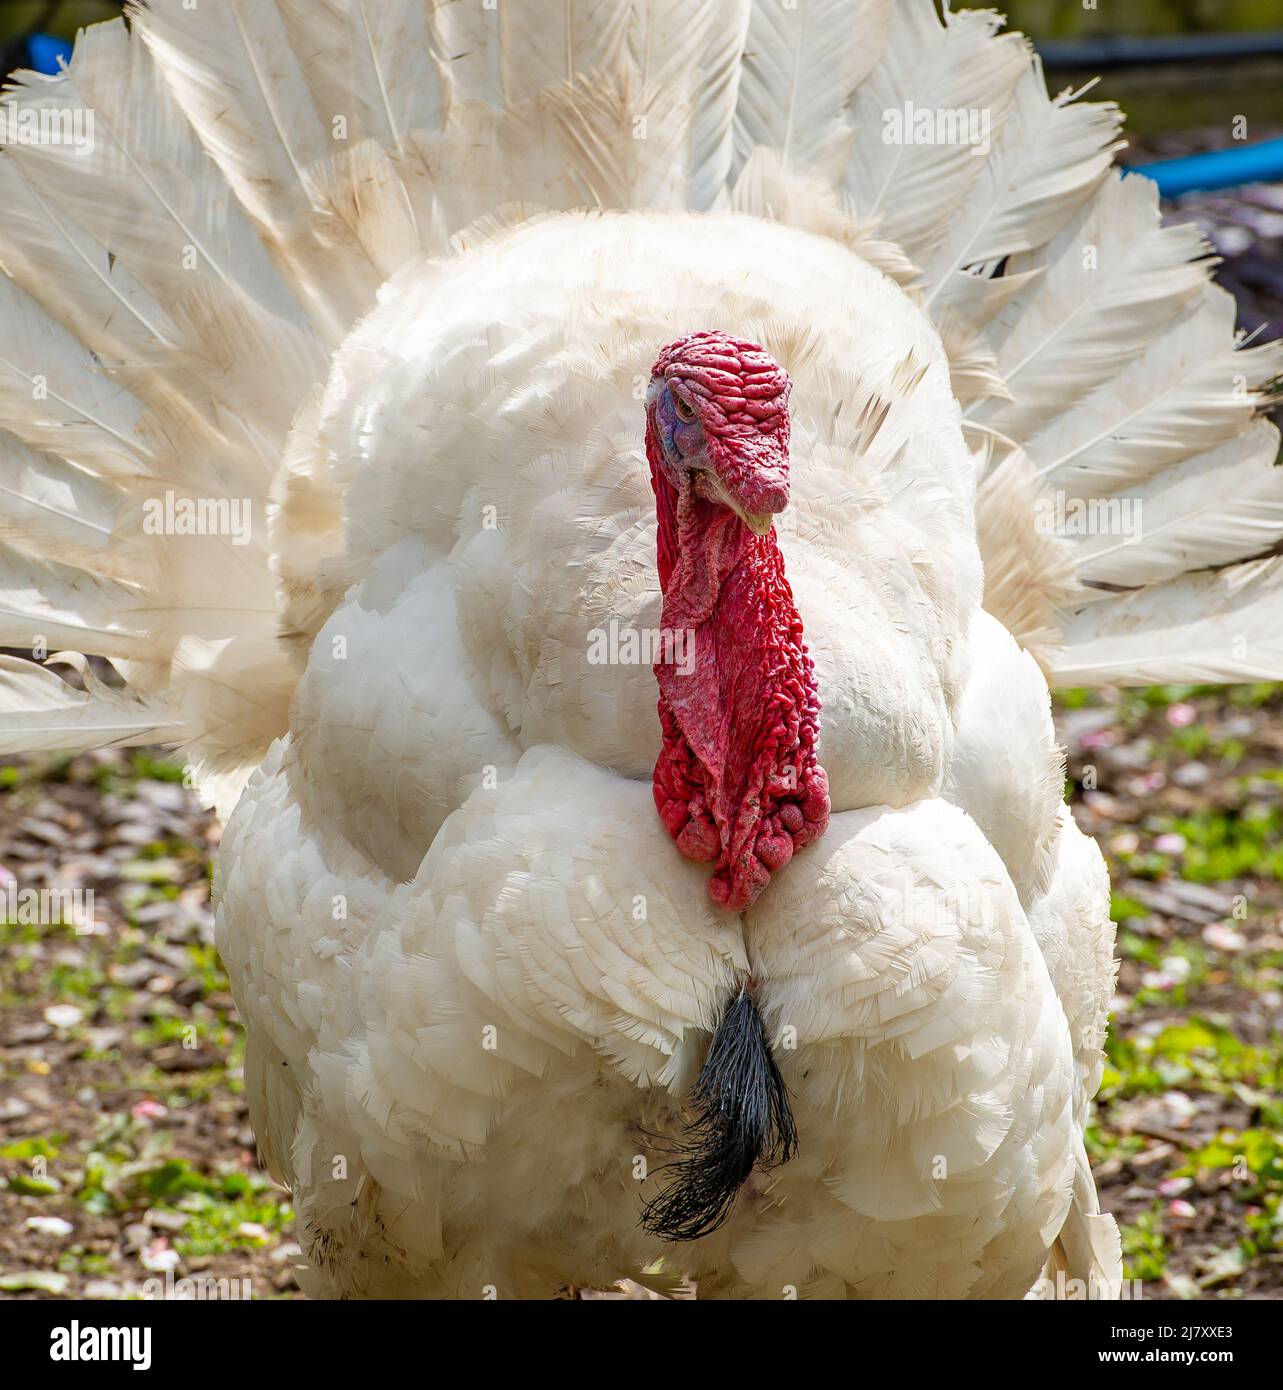 Blackpool, Lancashire, UK. 11th May, 2022. A big white stag turkey in all his finery at Ridgeway Farm, Blackpool, Lancashire, UK. Credit: John Eveson/Alamy Live News Stock Photo